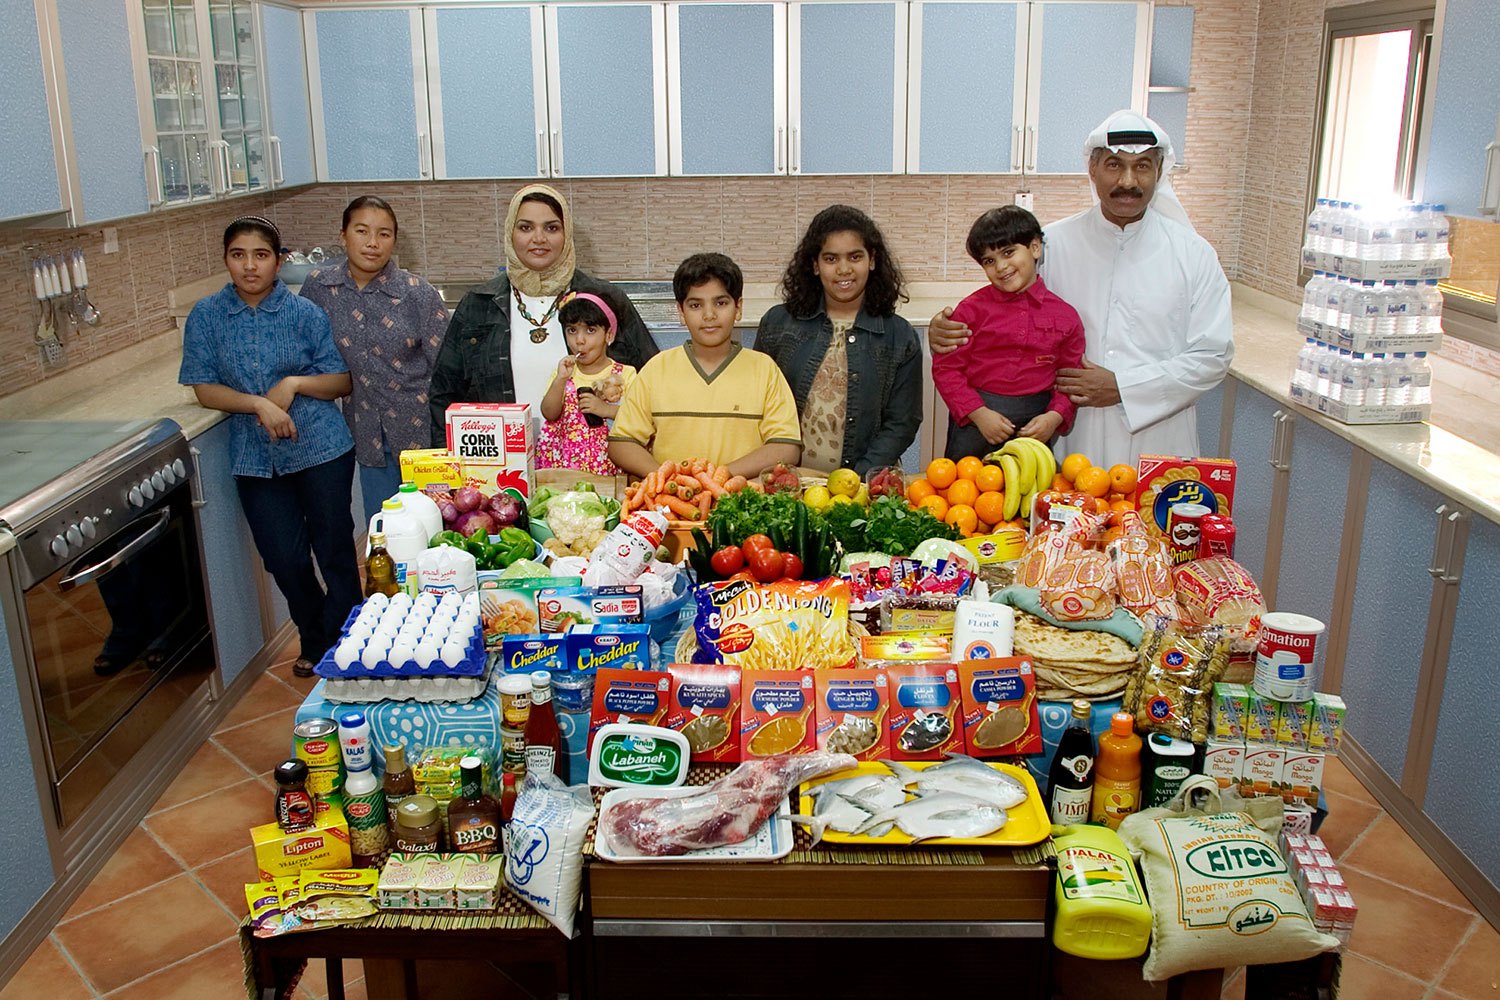 Kuwait: The Al Haggan family of Kuwait City. Food expenditure for one week: 63.63 dinar or $221.45. Family recipe: Chicken biryani with basmati rice.